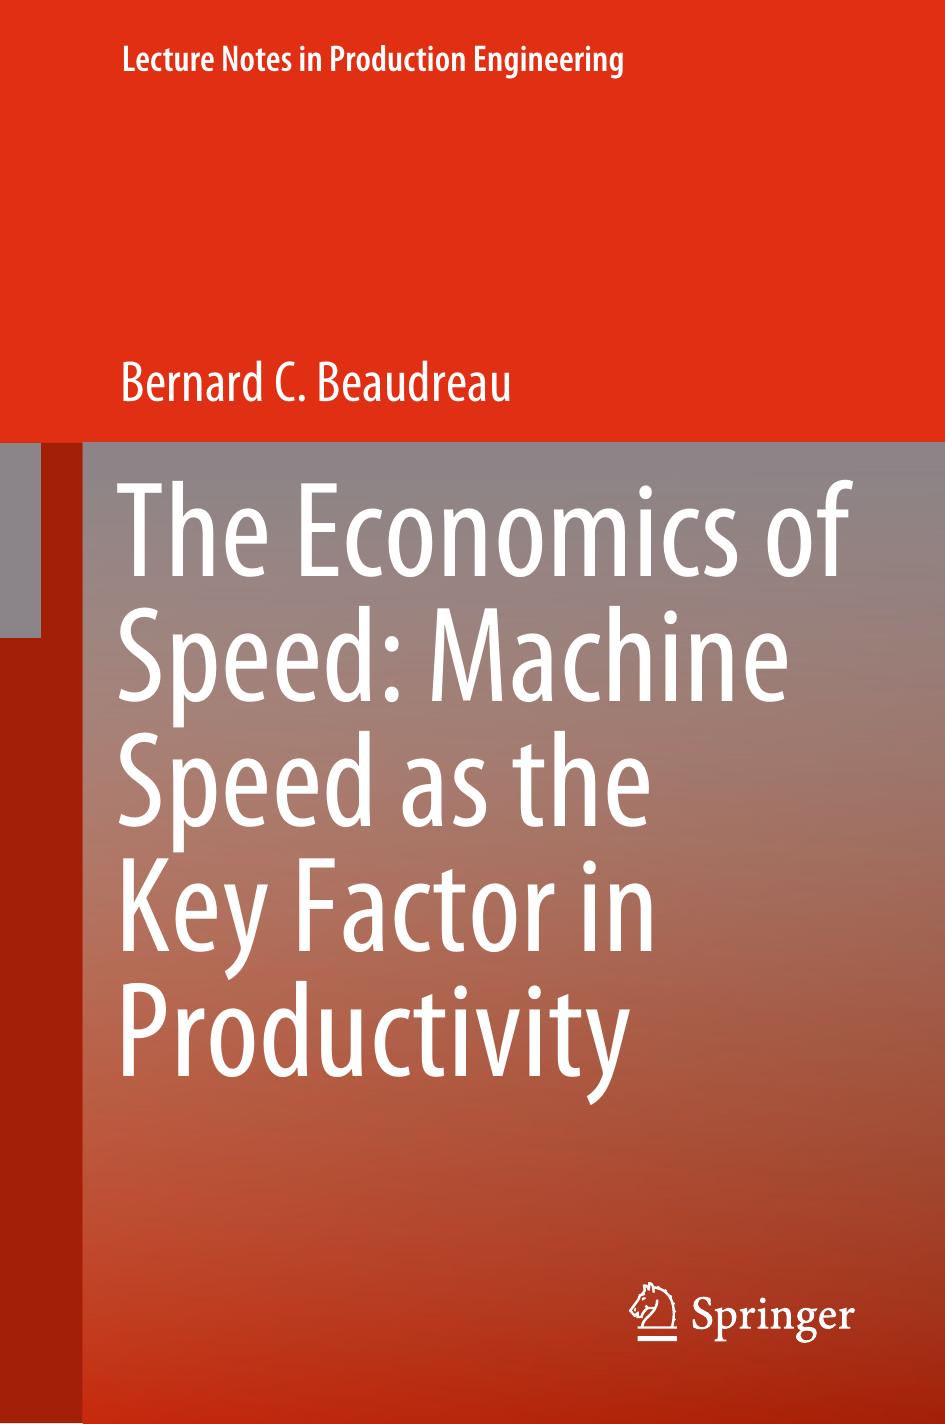 The Economics of Speed: Machine Speed as the Key Factor in Productivity by Bernard C. Beaudreau